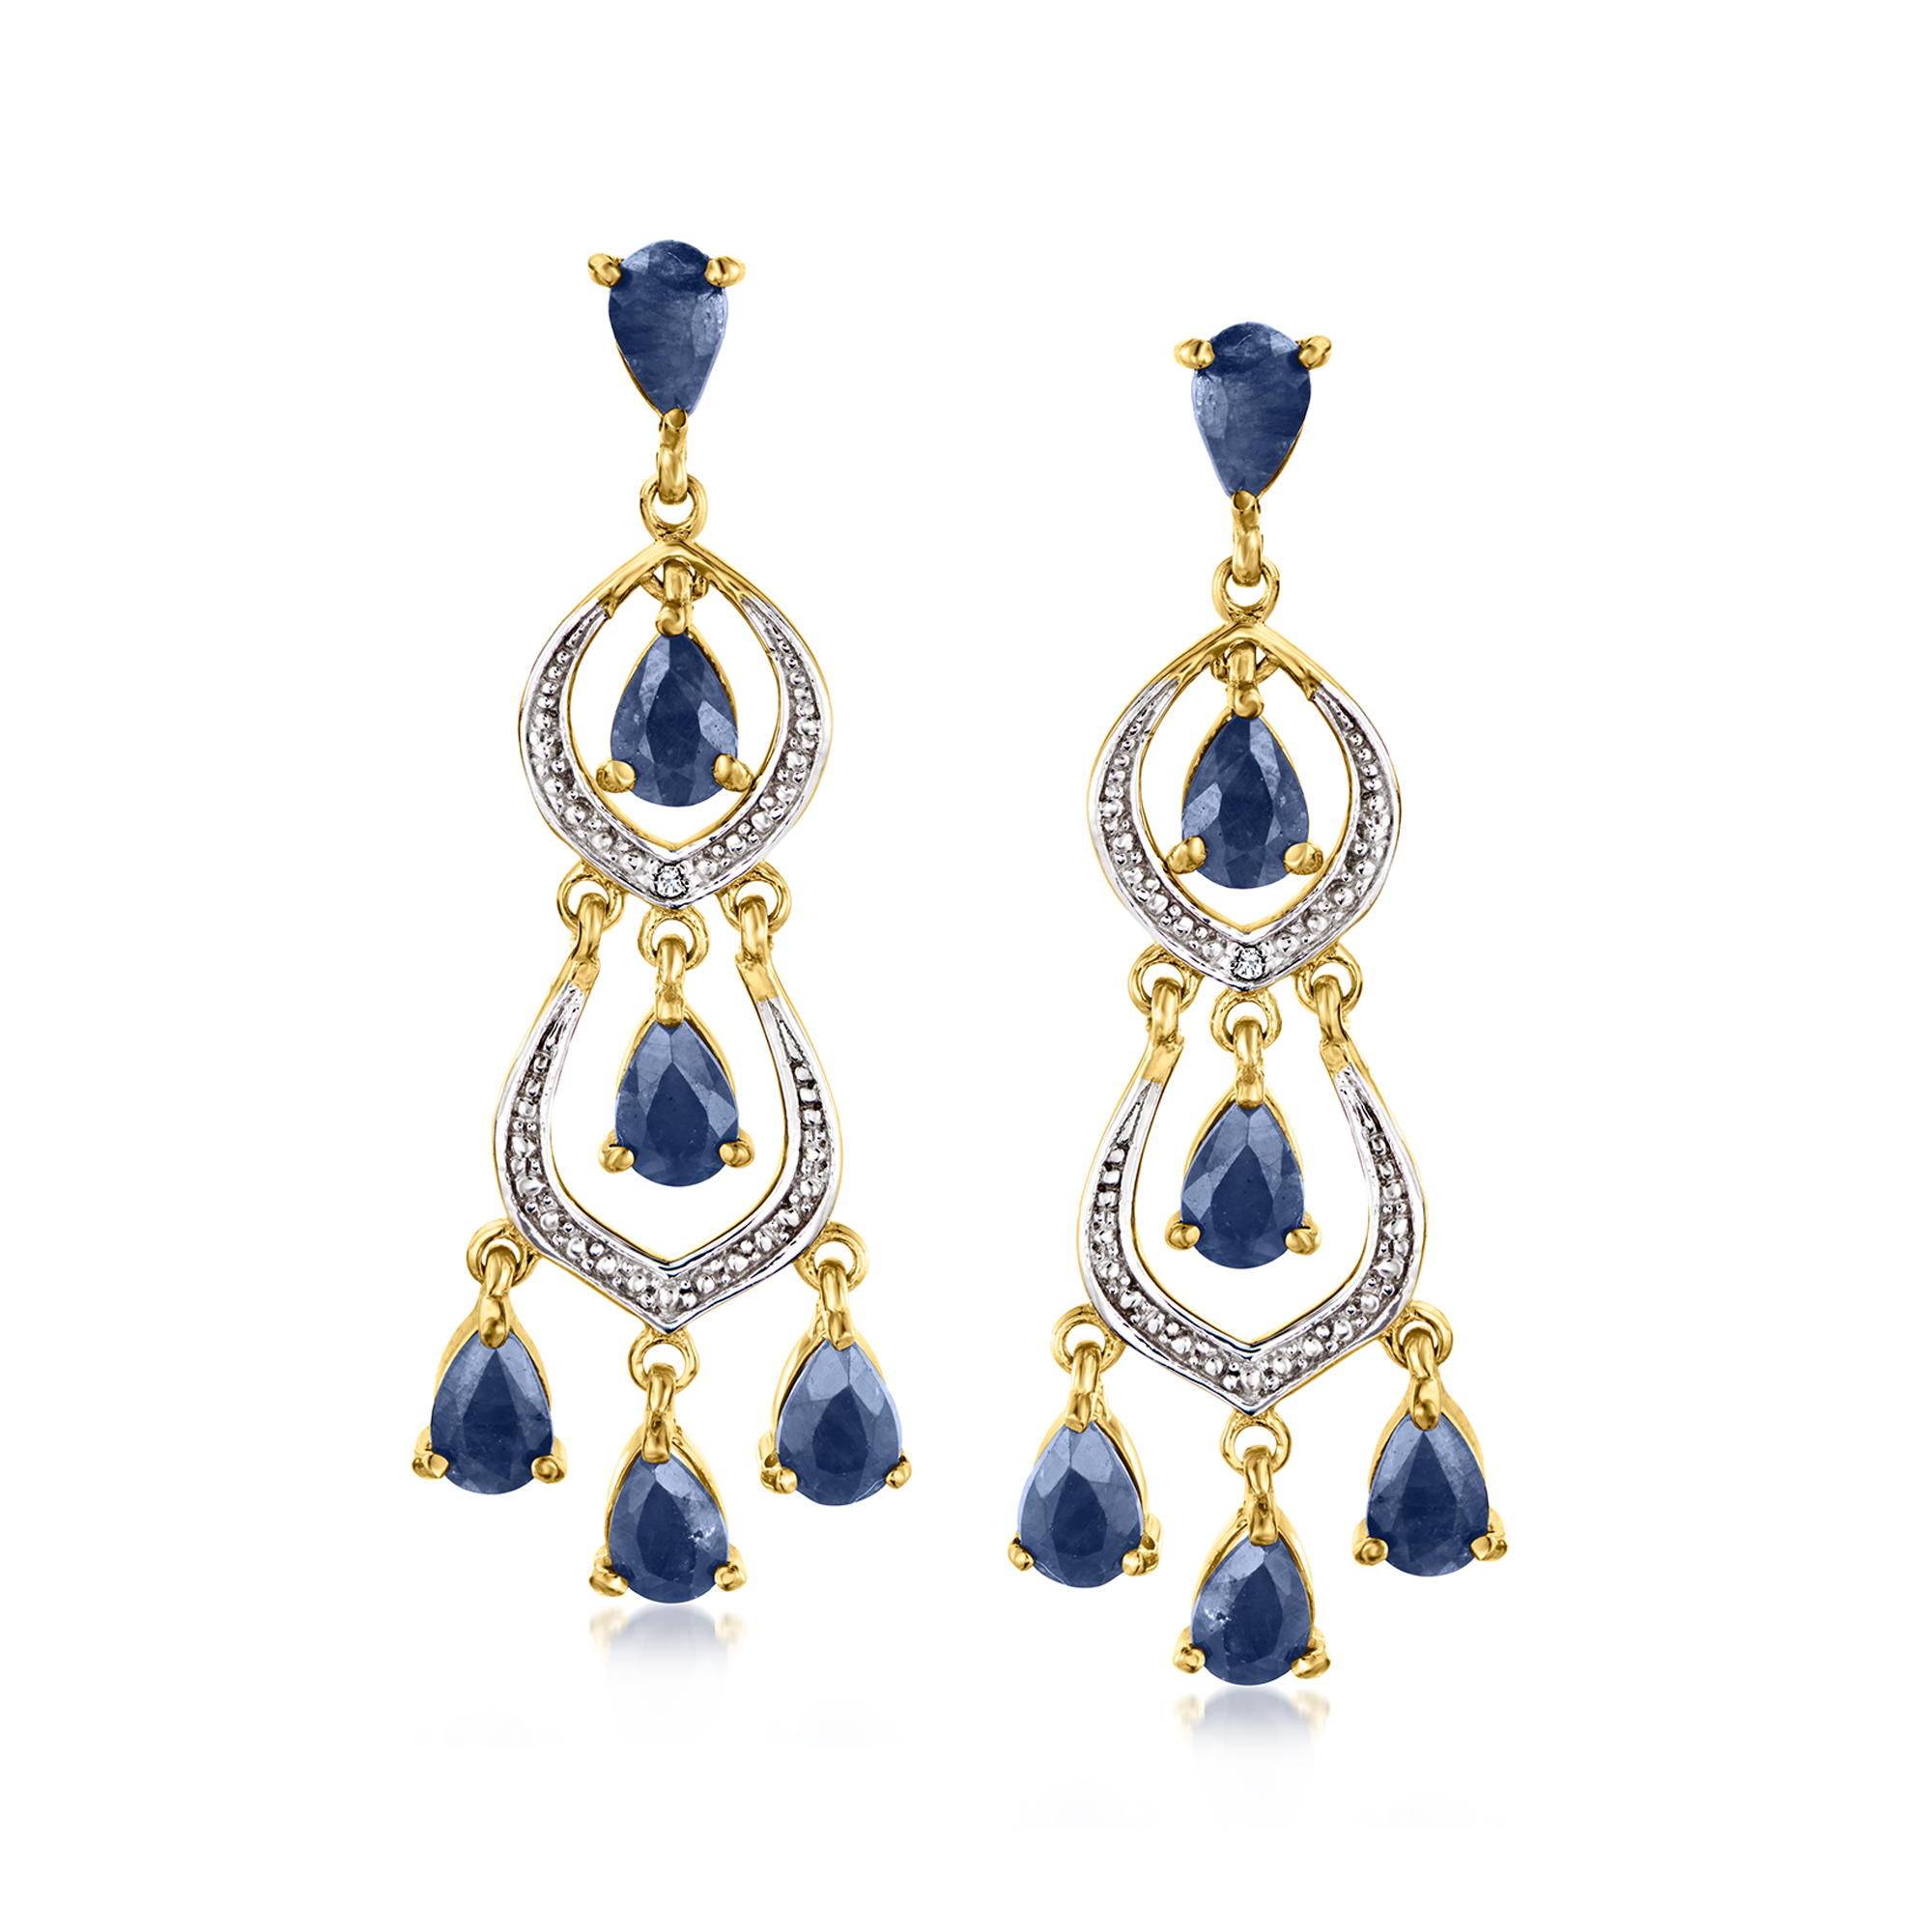 4.80 ct. Sapphire Chandelier Earrings with Diamond Accents in 18kt  Gold Over Sterling Ross-Simons